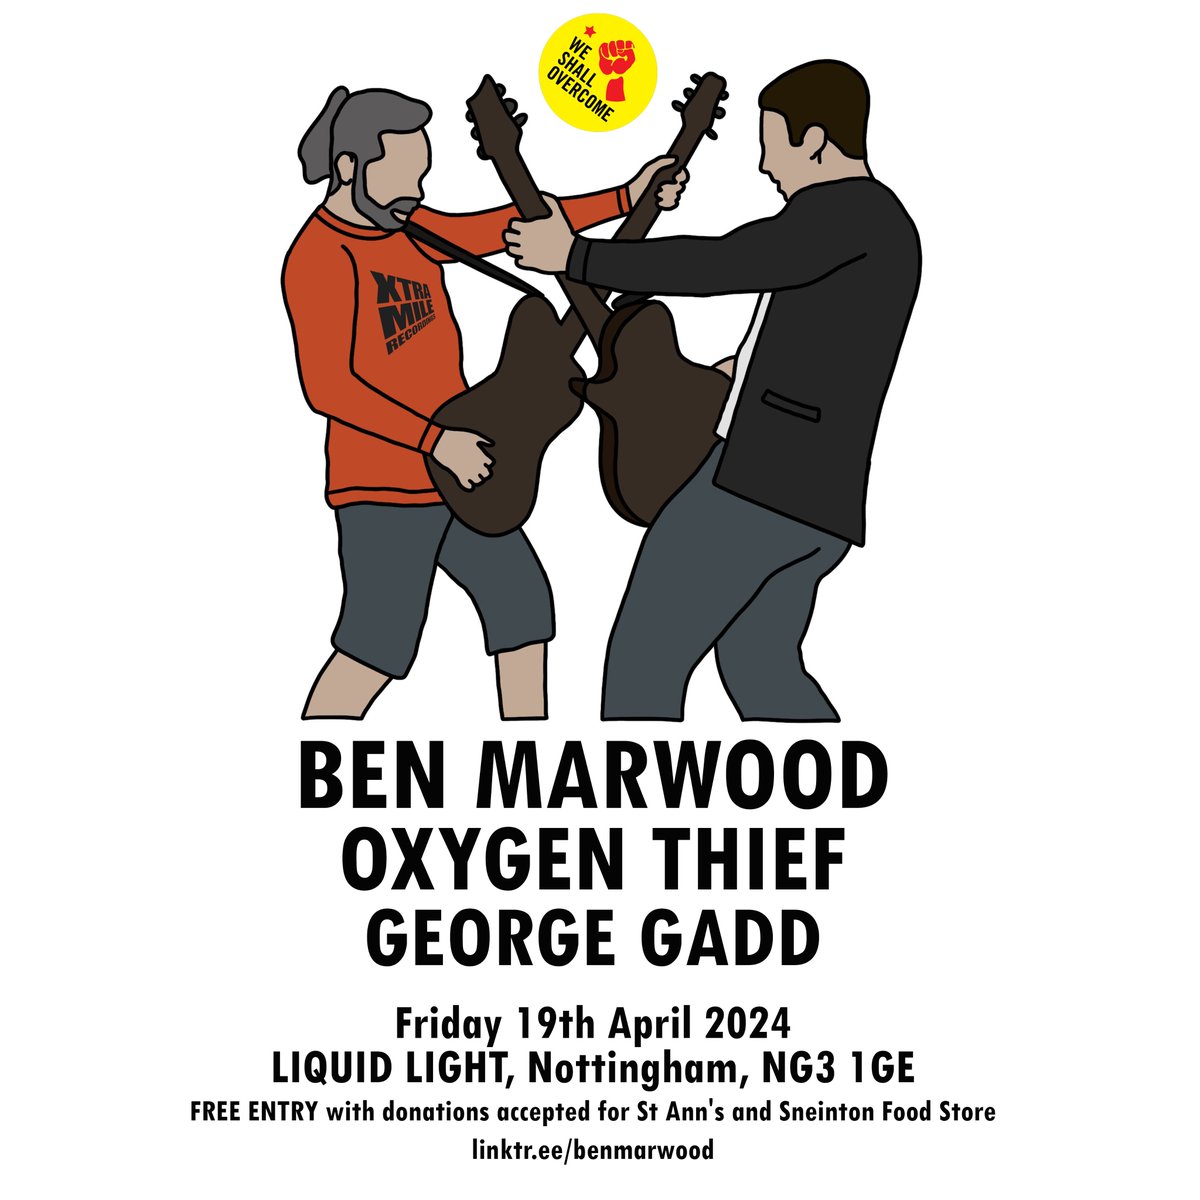 Bringing the delightful @benmarwoodmusic and @oxygenthiefYEAH back to Nottingham on 19th April It's FREE ENTRY and looking forward to my first time playing @LiquidLightBrew. Food bank donations to St Ann's and Sneinton Food Store and a collection bucket for @WSO_Notts